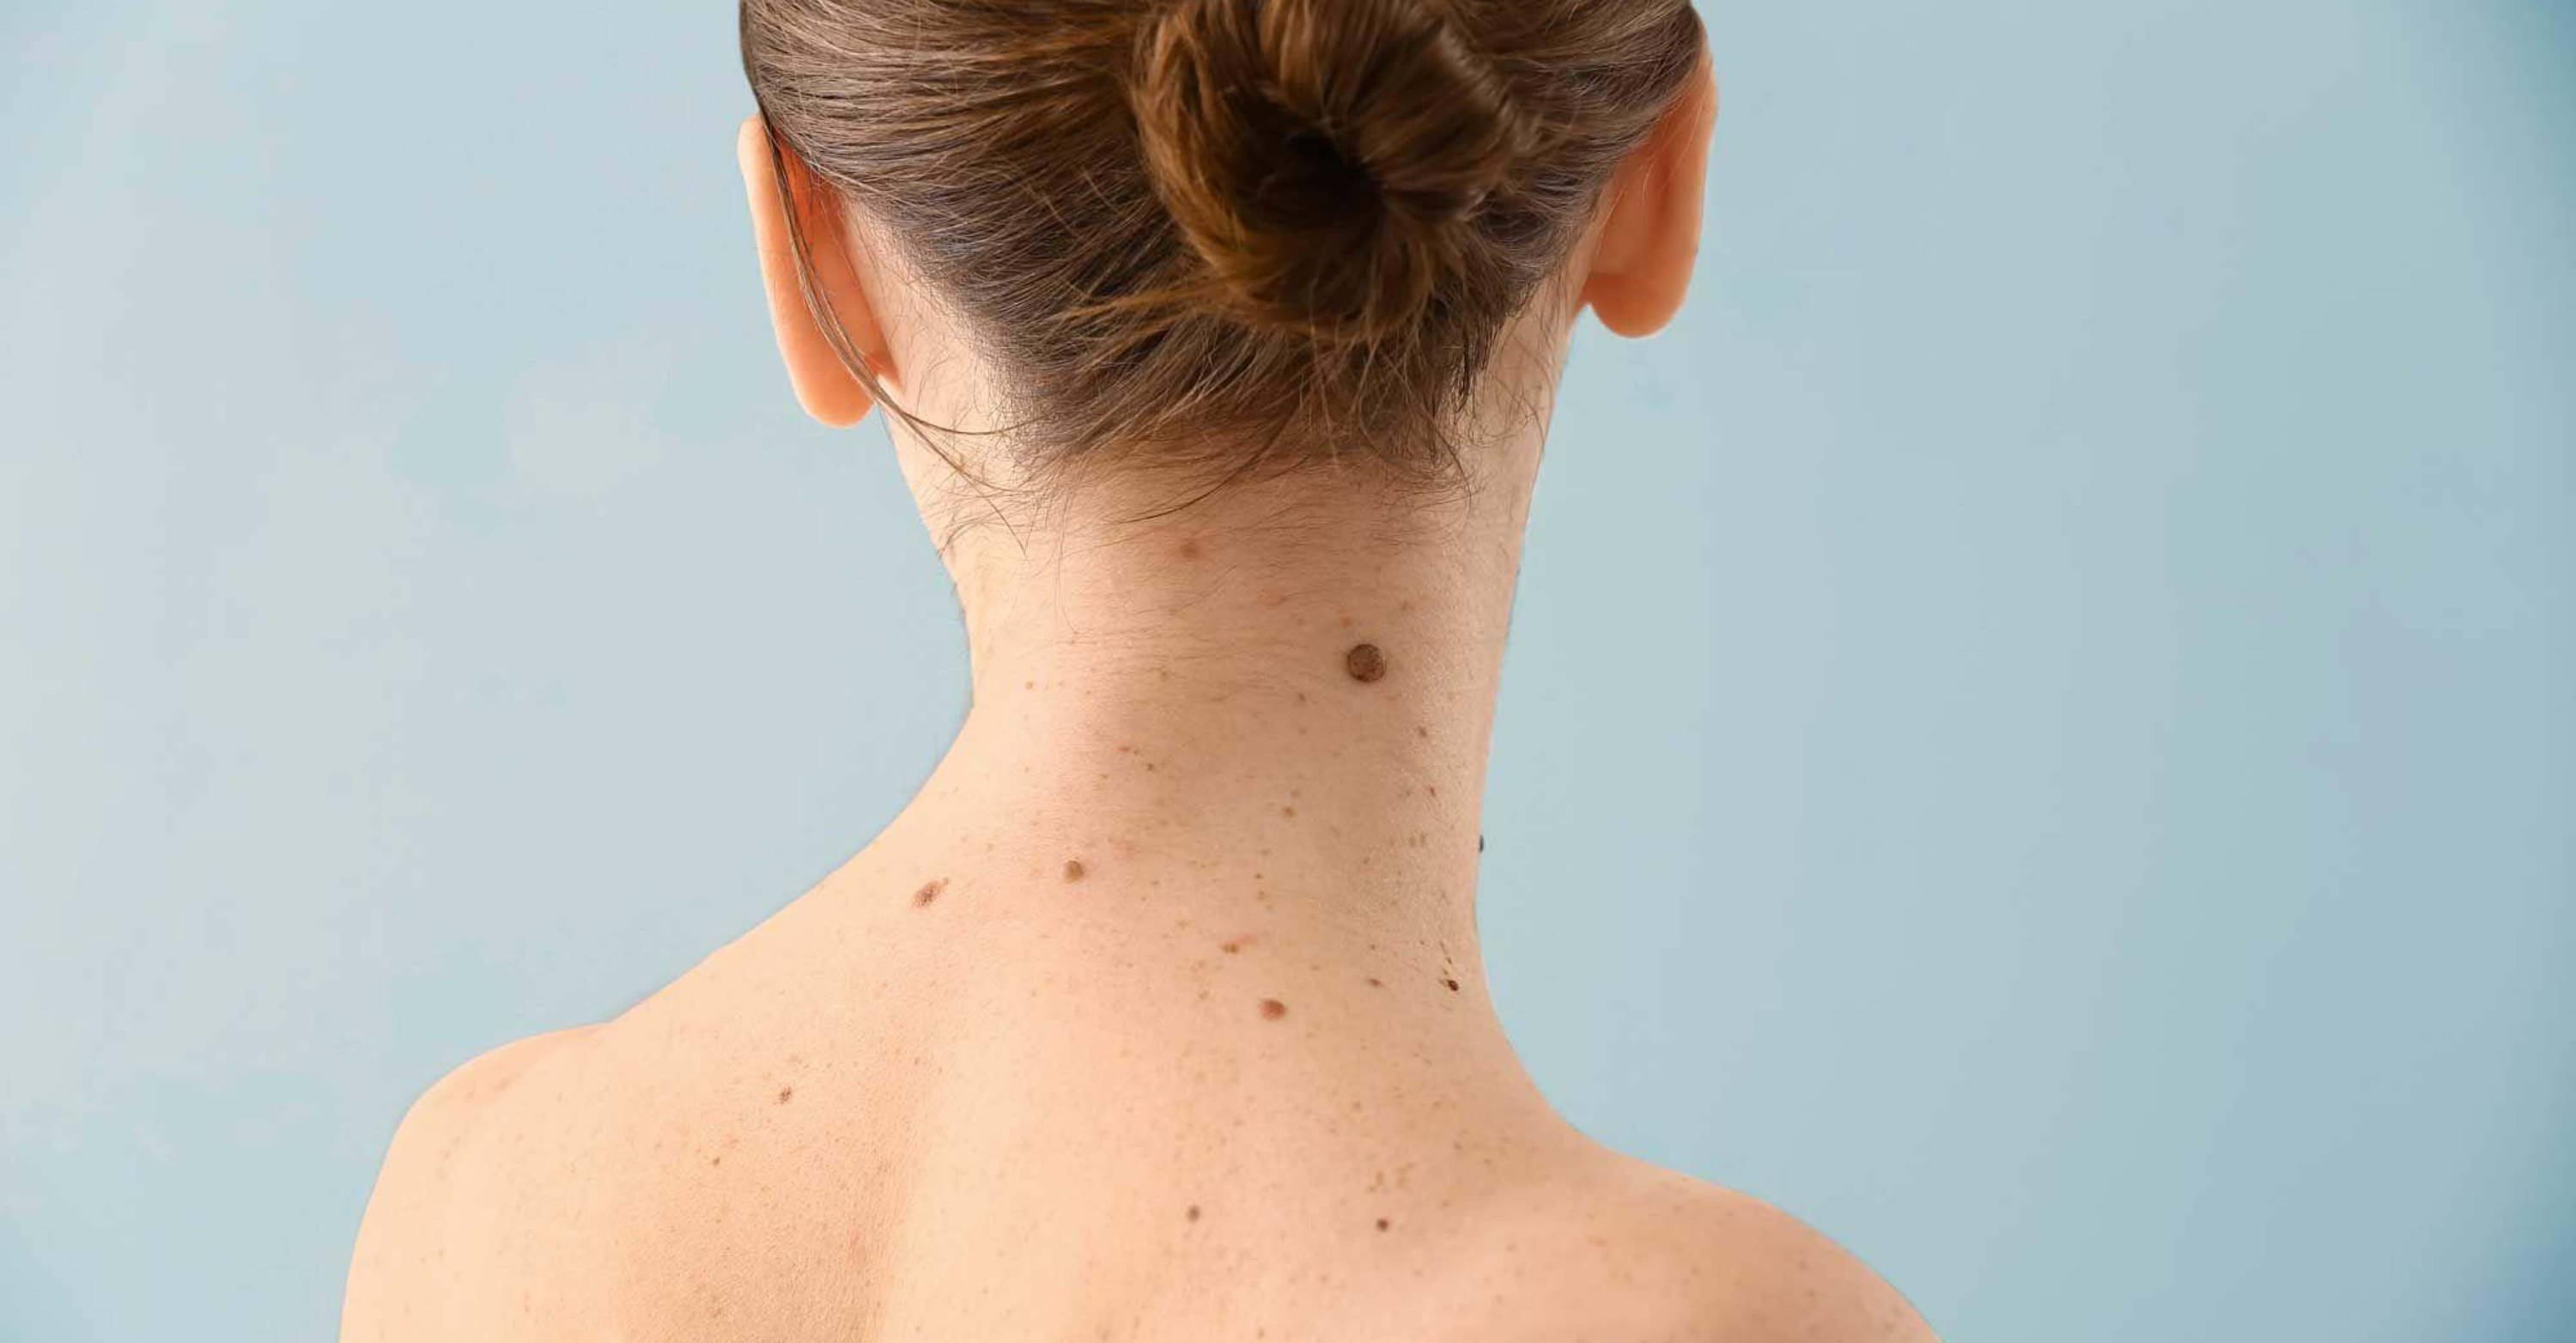 Skin tags on the neck